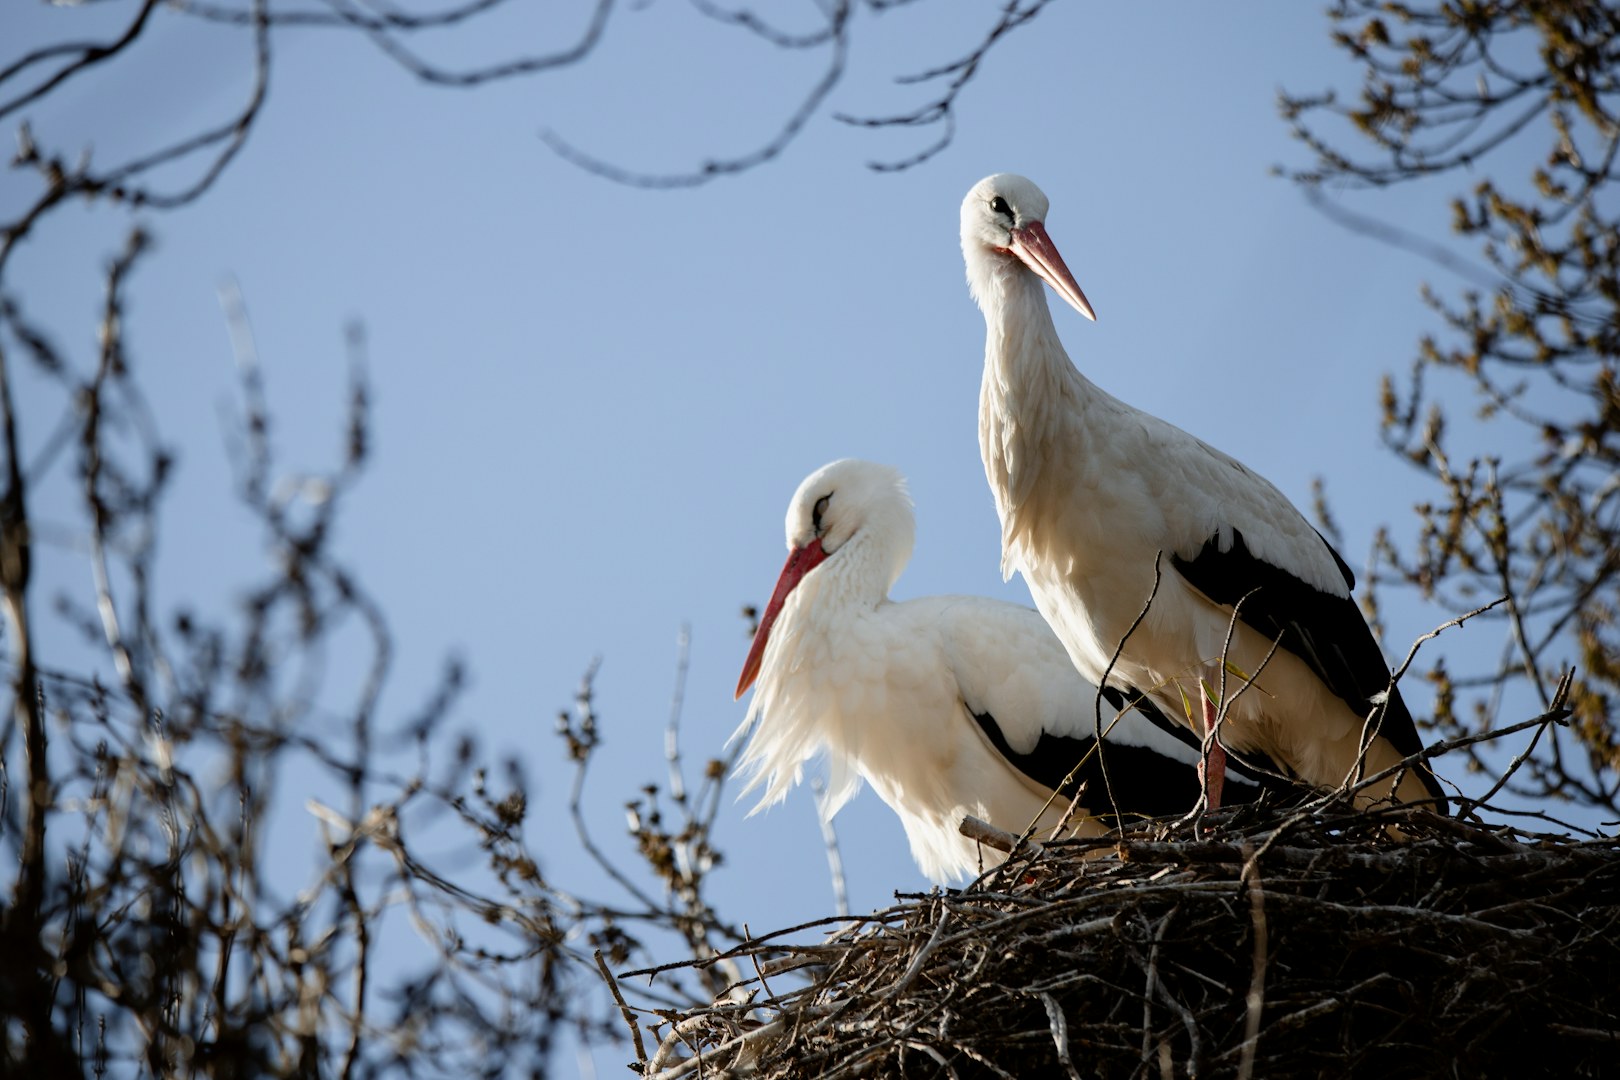 Pair of white storks standing in a nest among the branches